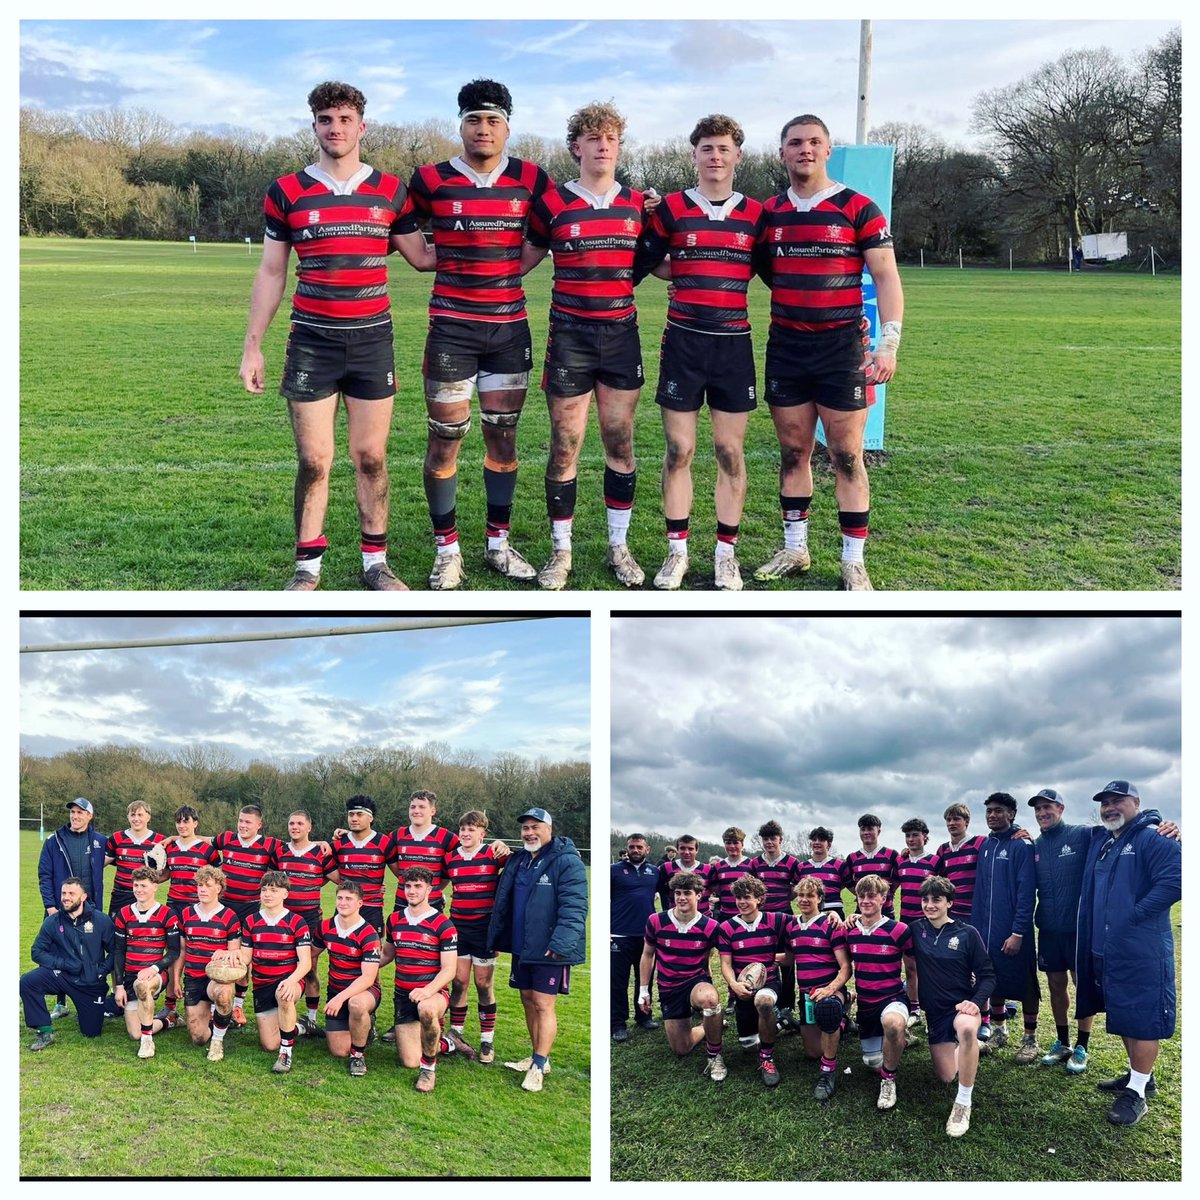 What a great few days @RPNS7s for the 14,16 and 18s. With over 800 schools and 10,000 competitors across the week, it really is one of the toughest tournaments. Huge well done to the latter two year groups who made it through to the final stages and also the U6th leavers. #Legacy